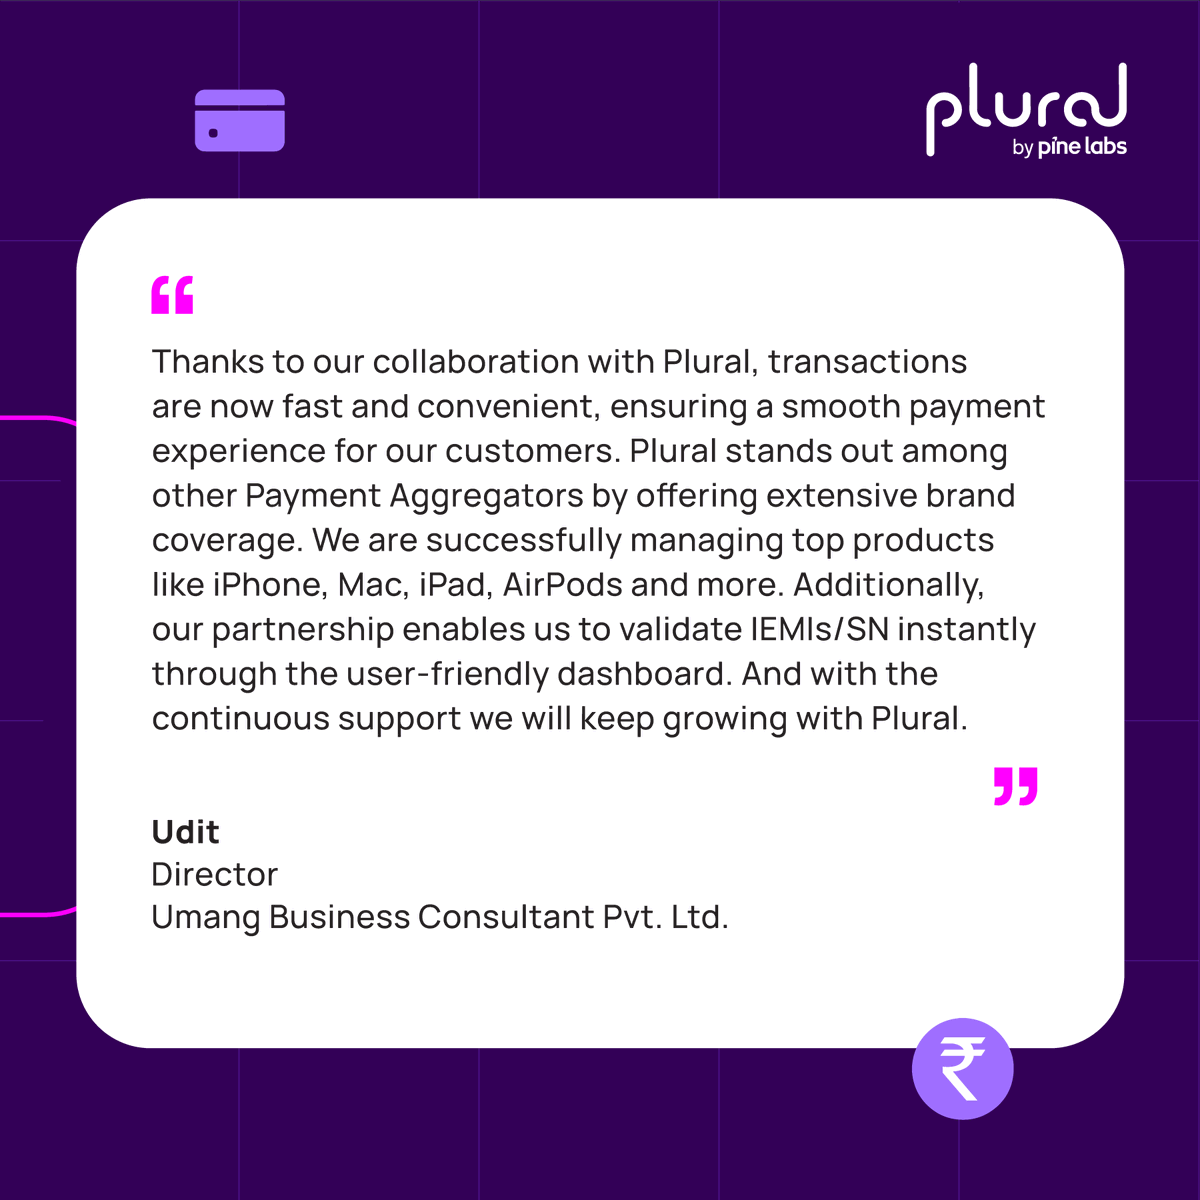 iTech’s partnership with Plural powered efficient sales and an effortless checkout experience.
.
.
.
.
.
#apple #payments #plural #testimonial #onlinepayments #digitalpayments #fintech #brand